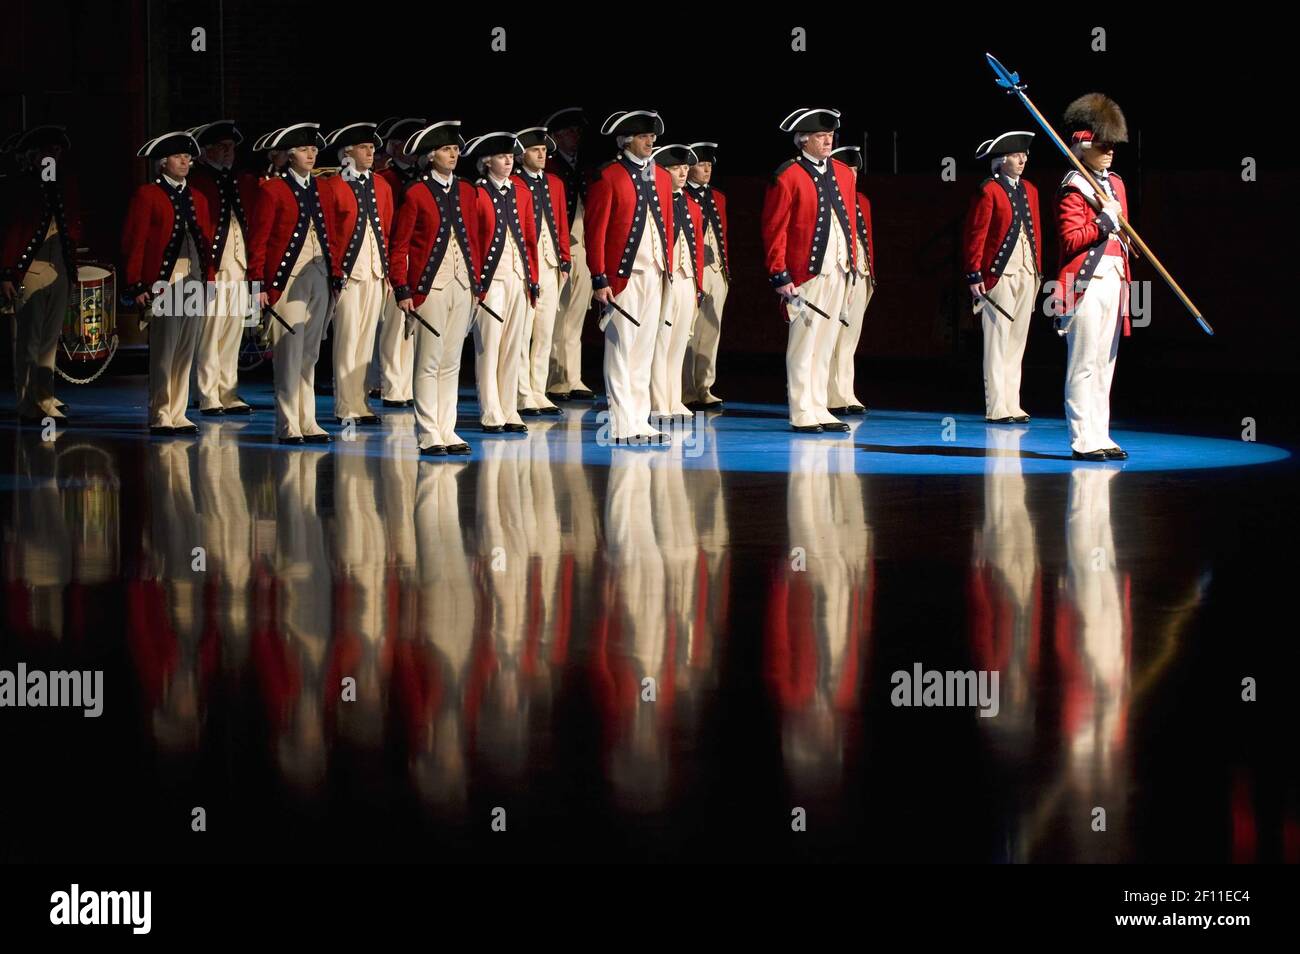 2 November 2009 - Arlington, Virginia - Members of the Old Guard stand in formation during a welcoming ceremony for Secretary of the Army John McHugh hosted by Chief of Staff of the Army Gen. George W. Casey, Jr. and presided over by Secretary of Defense Robert M. Gates at Ft. Myer, Arlington, Va., Nov. 2, 2009. McHugh was sworn in as the 21st Secretary of the Army on Sept. 21, 2009. Photo Credit: Cherie Cullen/DOD/Sipa Press/0911041939 Stock Photo